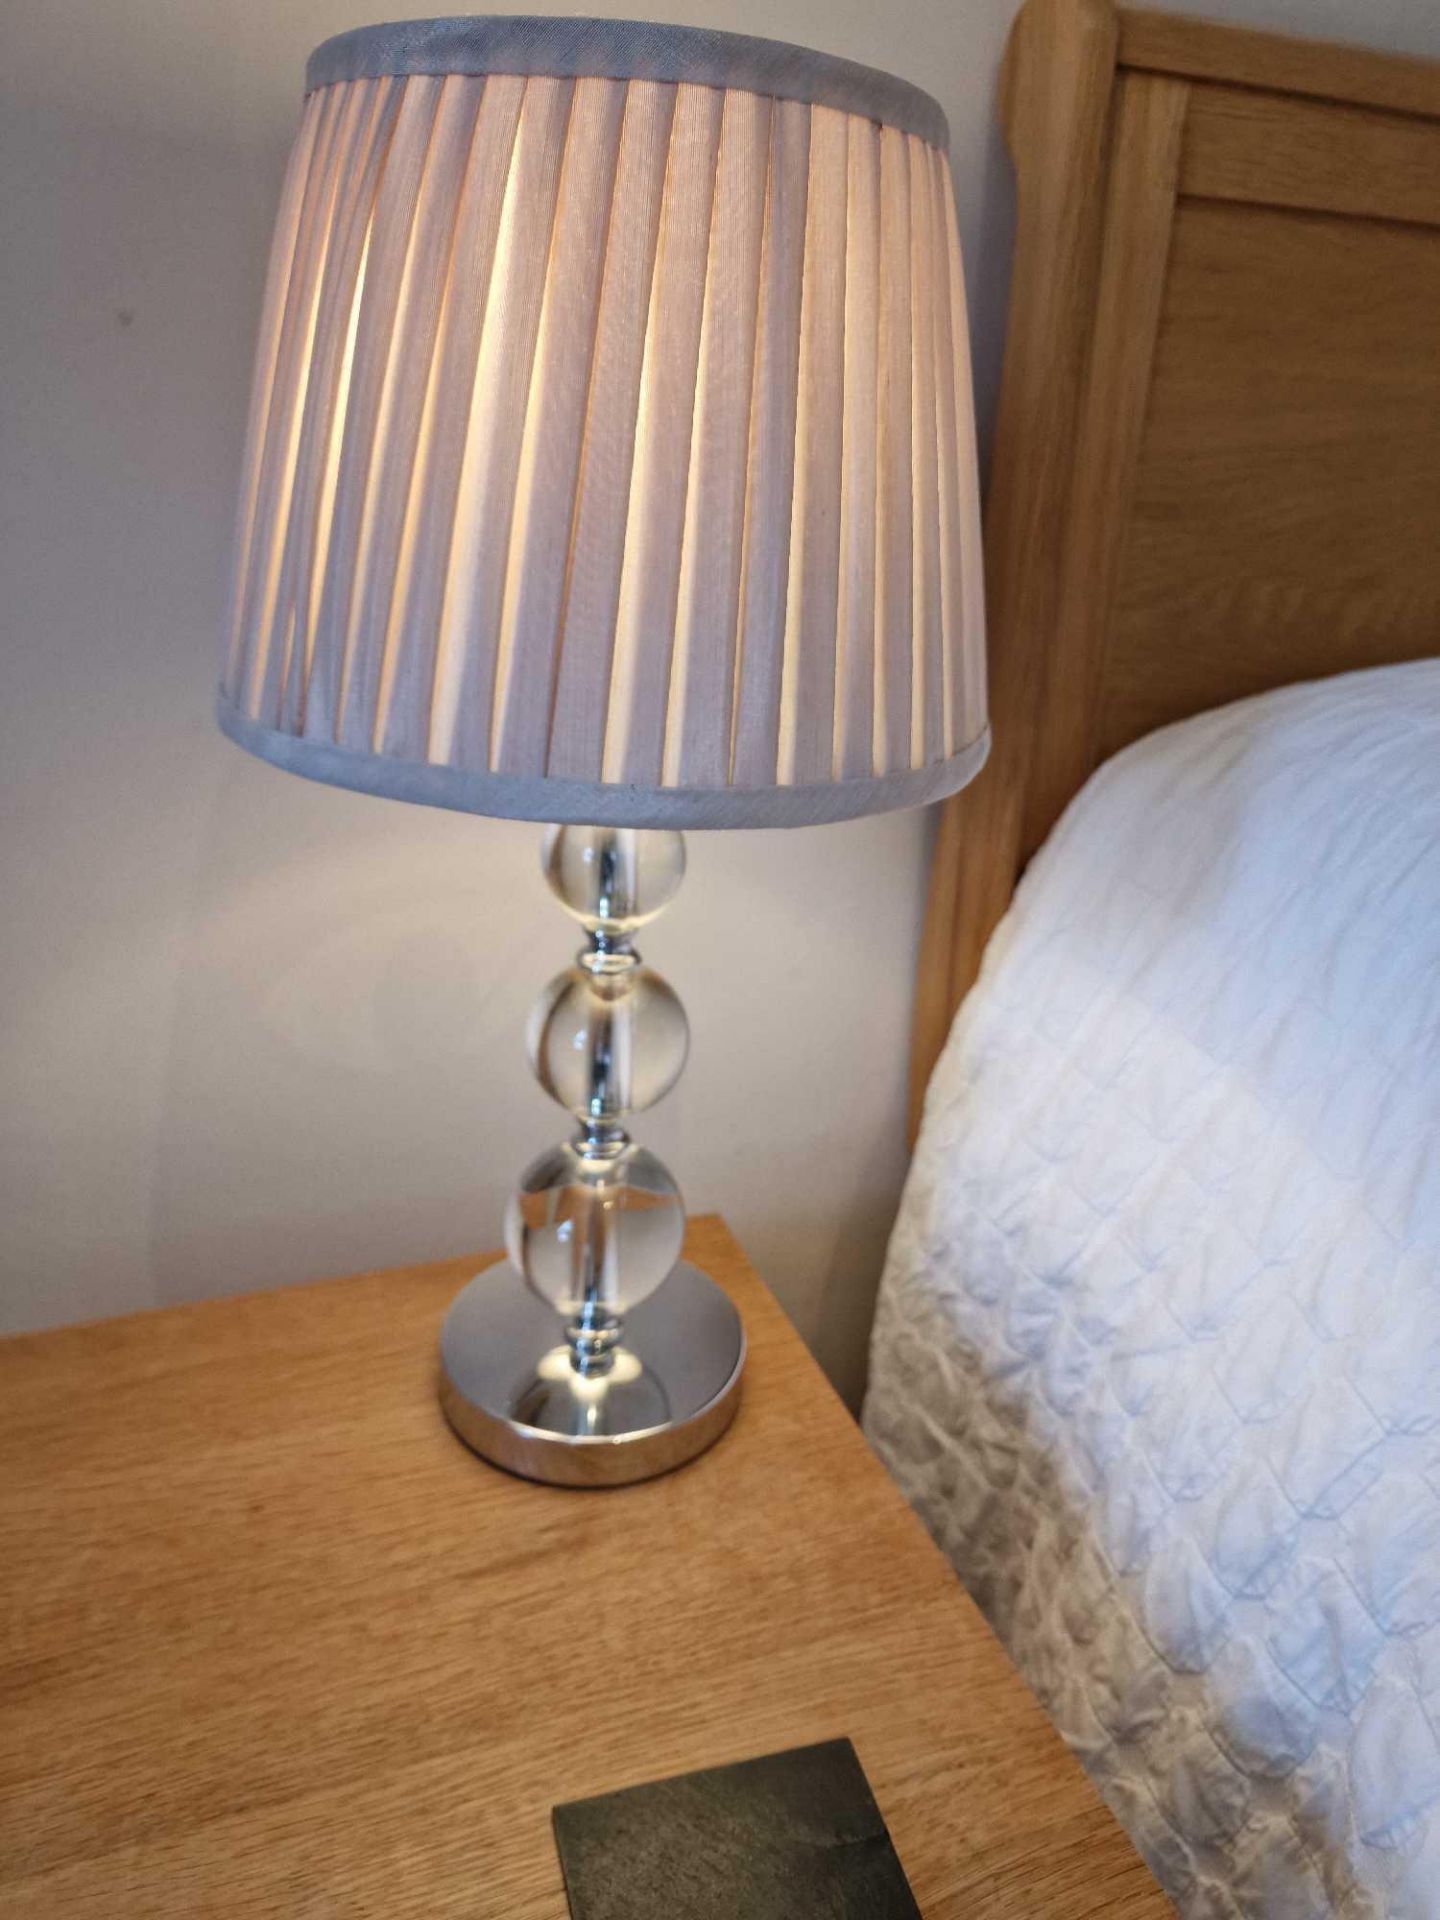 A Pair Of Classic Stacked Orb Table Lamps With Linen Shade A Table Lamp Of Elegance And Grace,